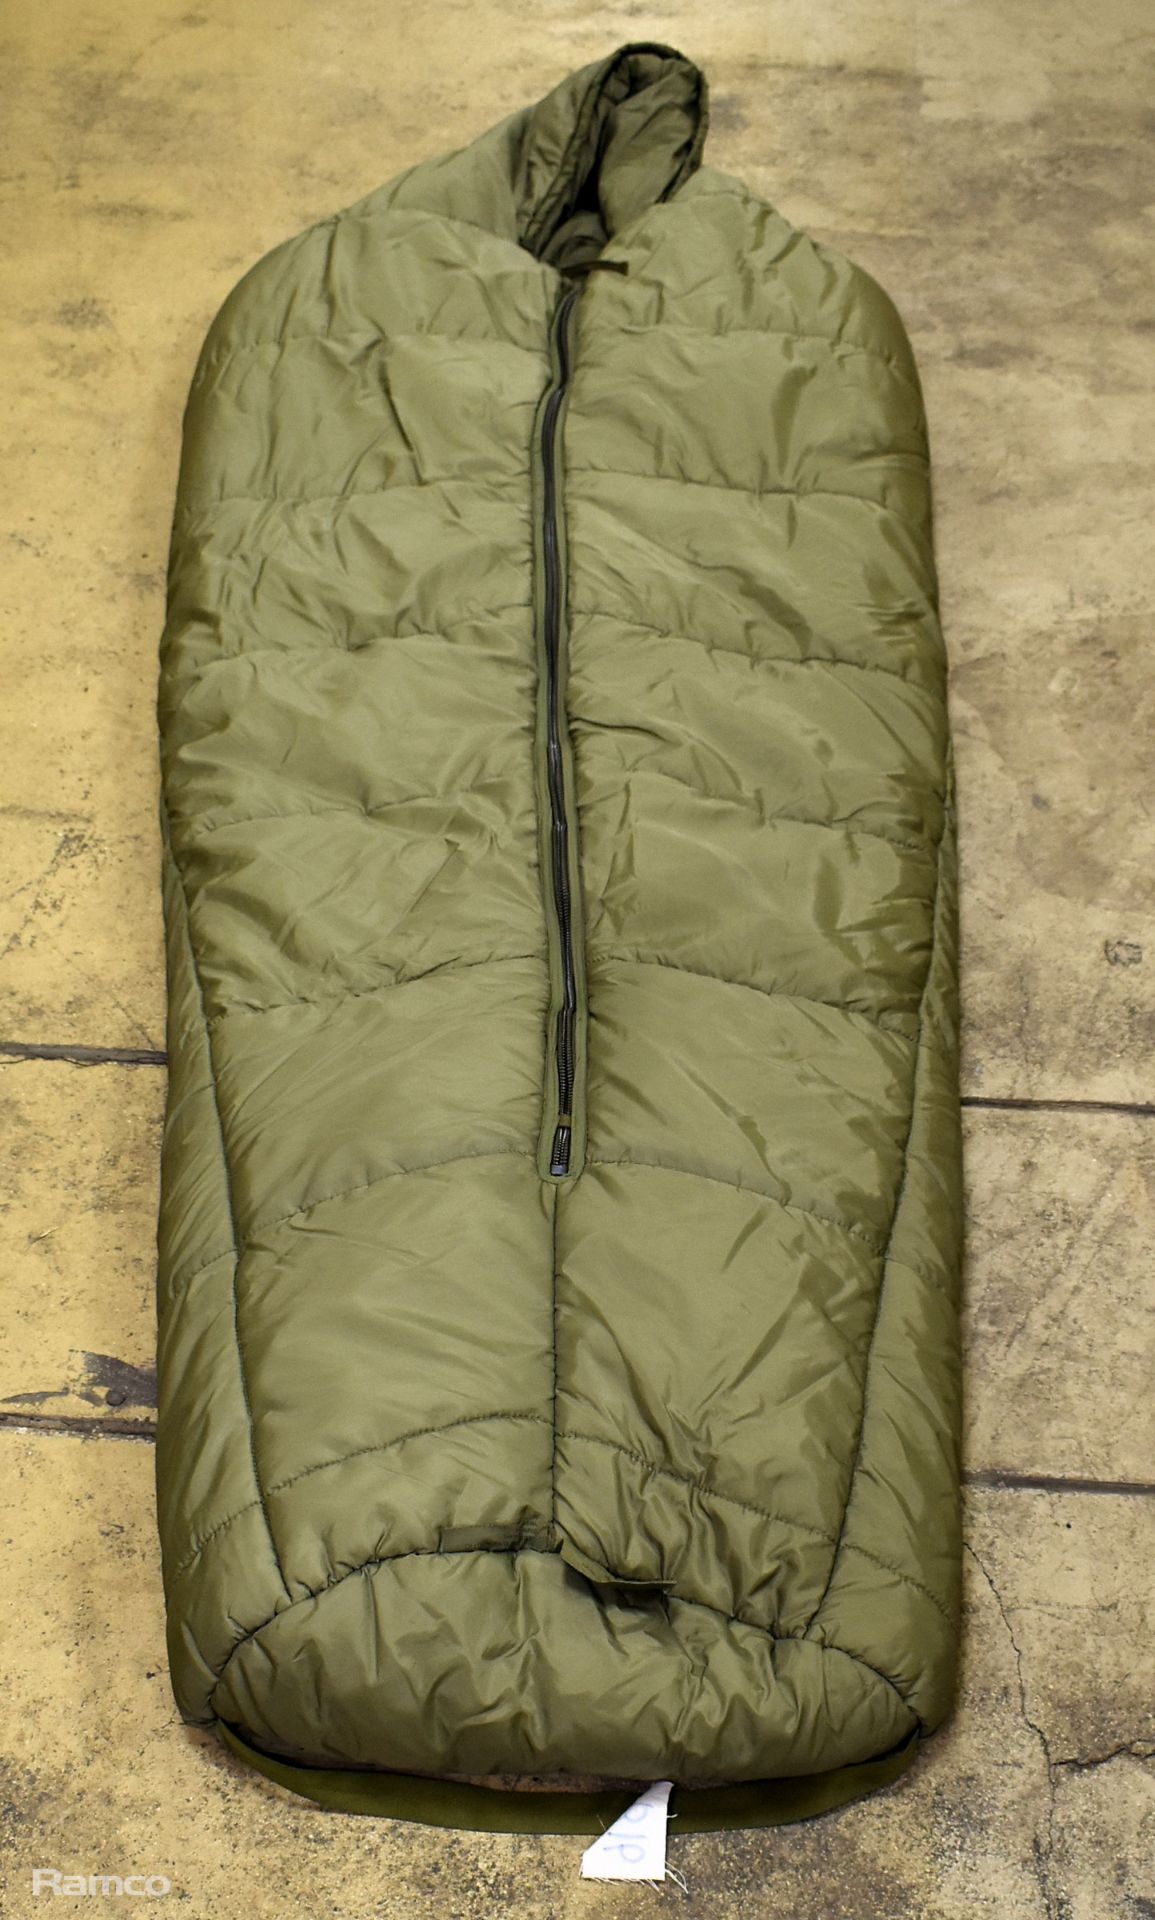 30x Sleeping bags - mixed grades and sizes